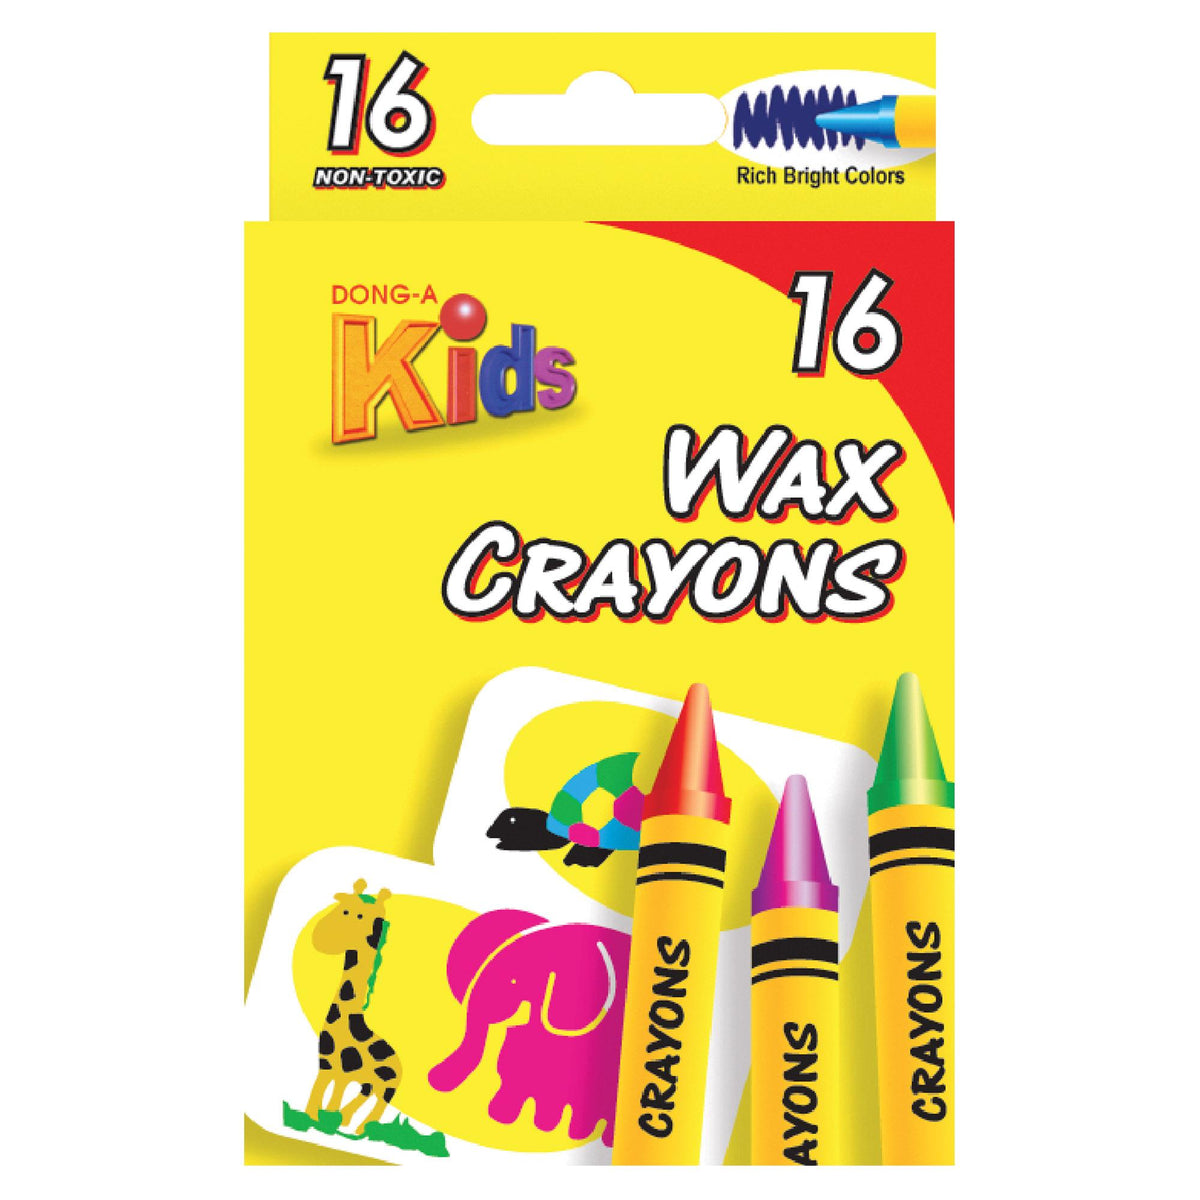 DONG-A 12 Color Innoxious Crayons School Kids Boys Set Made in Korea